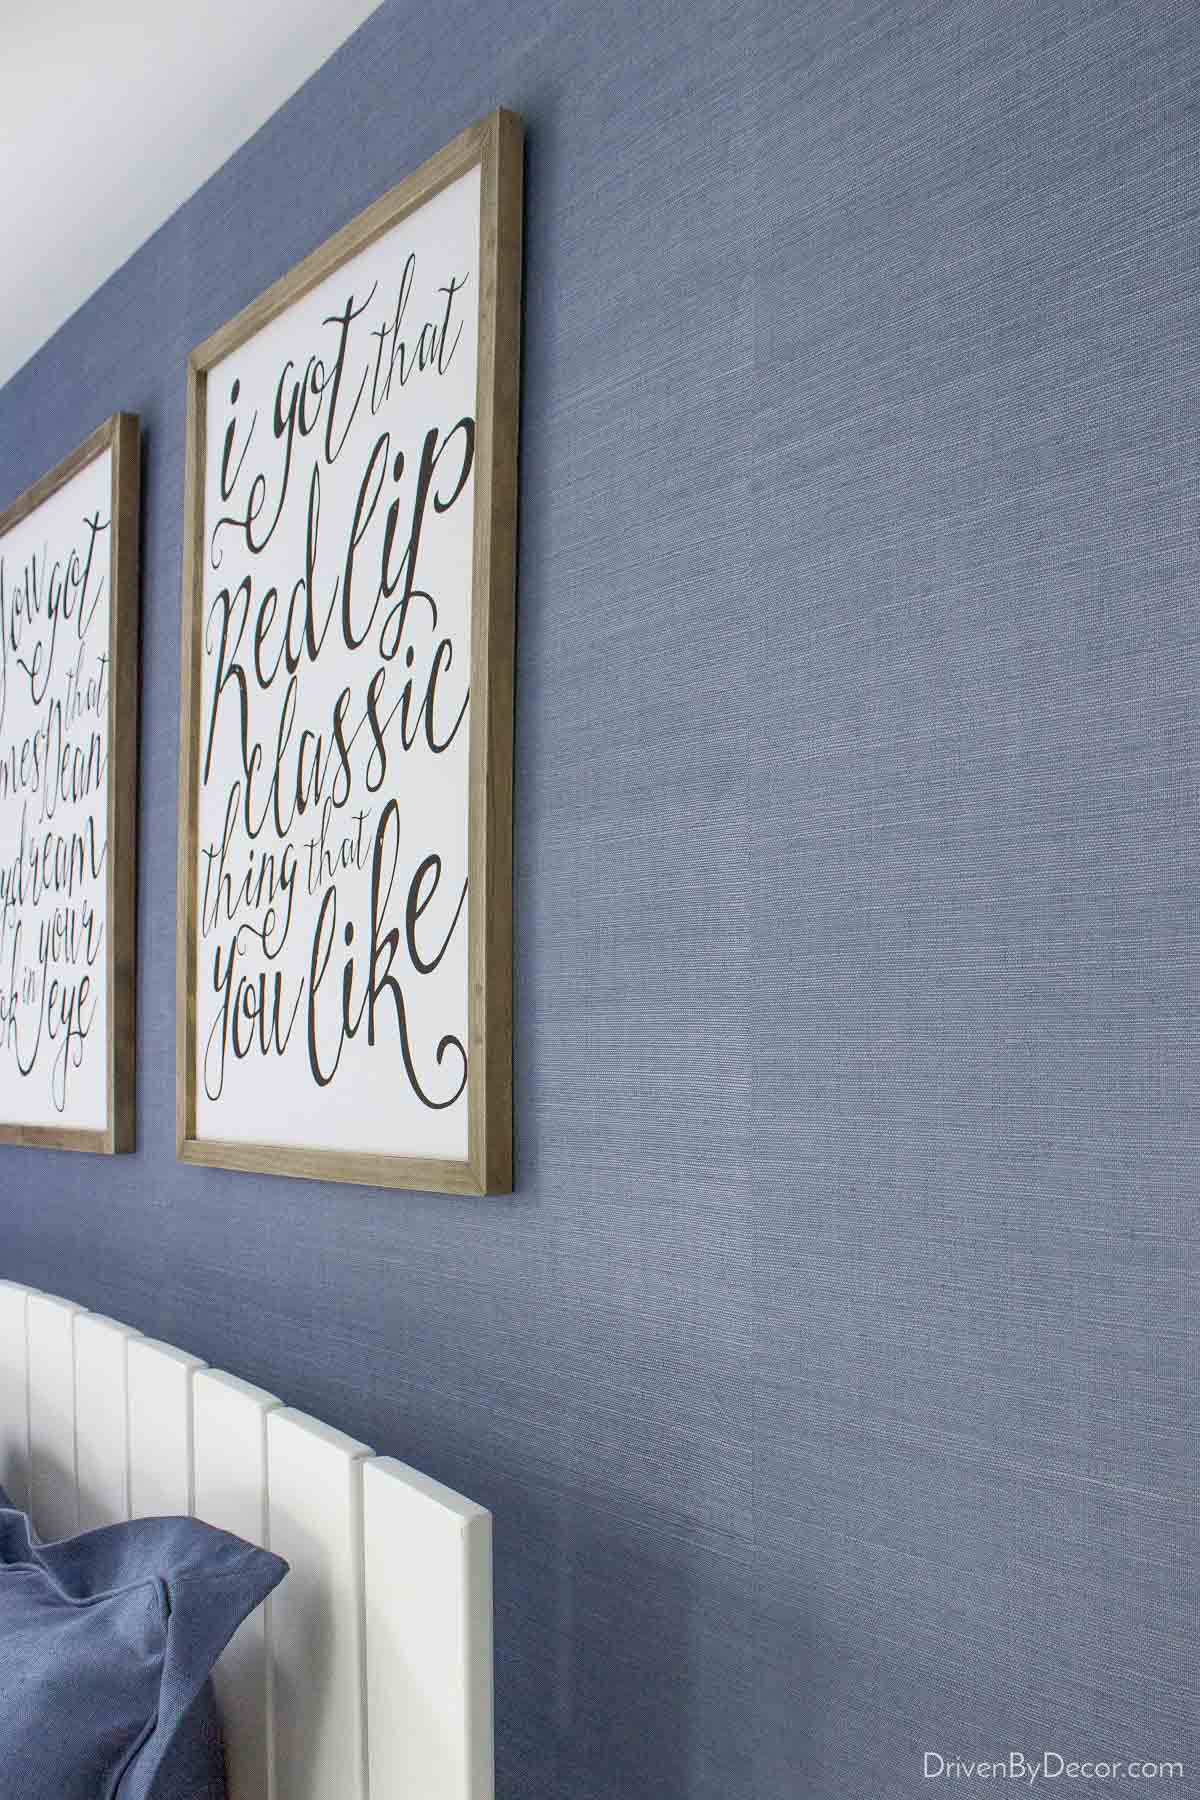 Grasscloth Wallpaper: Everything You Need to Know! - Driven by Decor